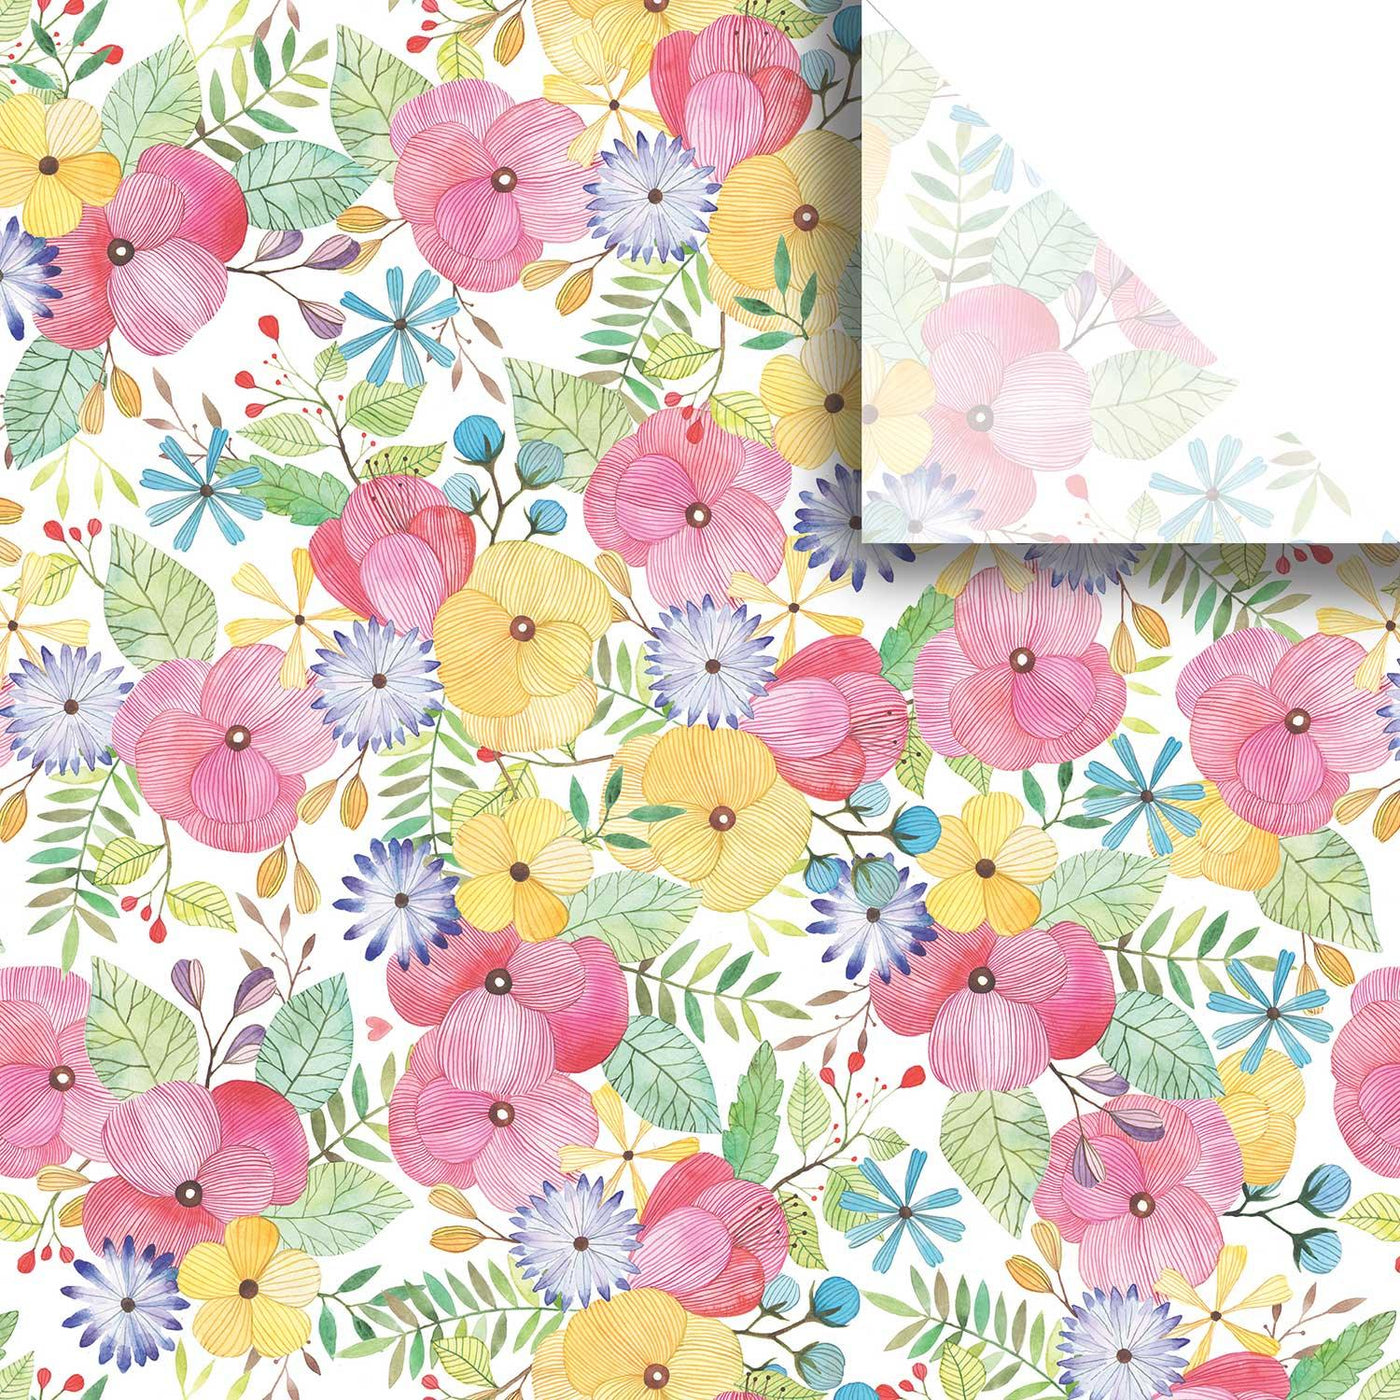 All Occasion Tissue Paper Assortment (Florals, 6 Pack, 32 sheets total) by Present Paper - Vysn